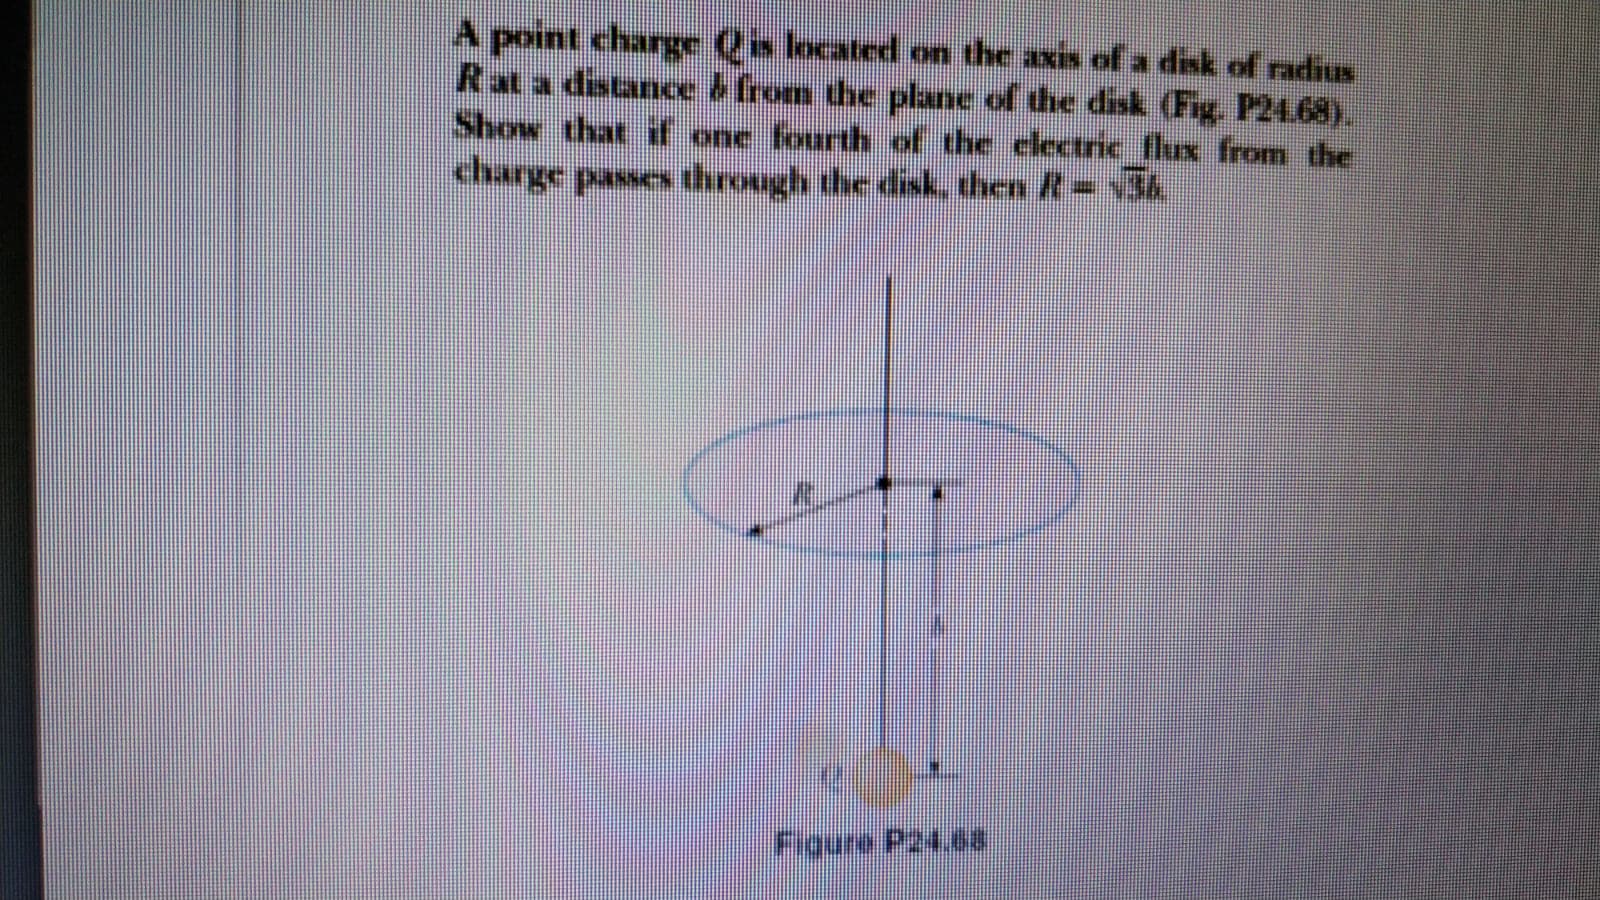 A point charge Qs located on the axis ofa disk of radius
Rat a distance & from the plane of the disk (Fig. P24.68).
Show that if one fourth of the electric flux from the
charge passes through the disk, then R= v36.
